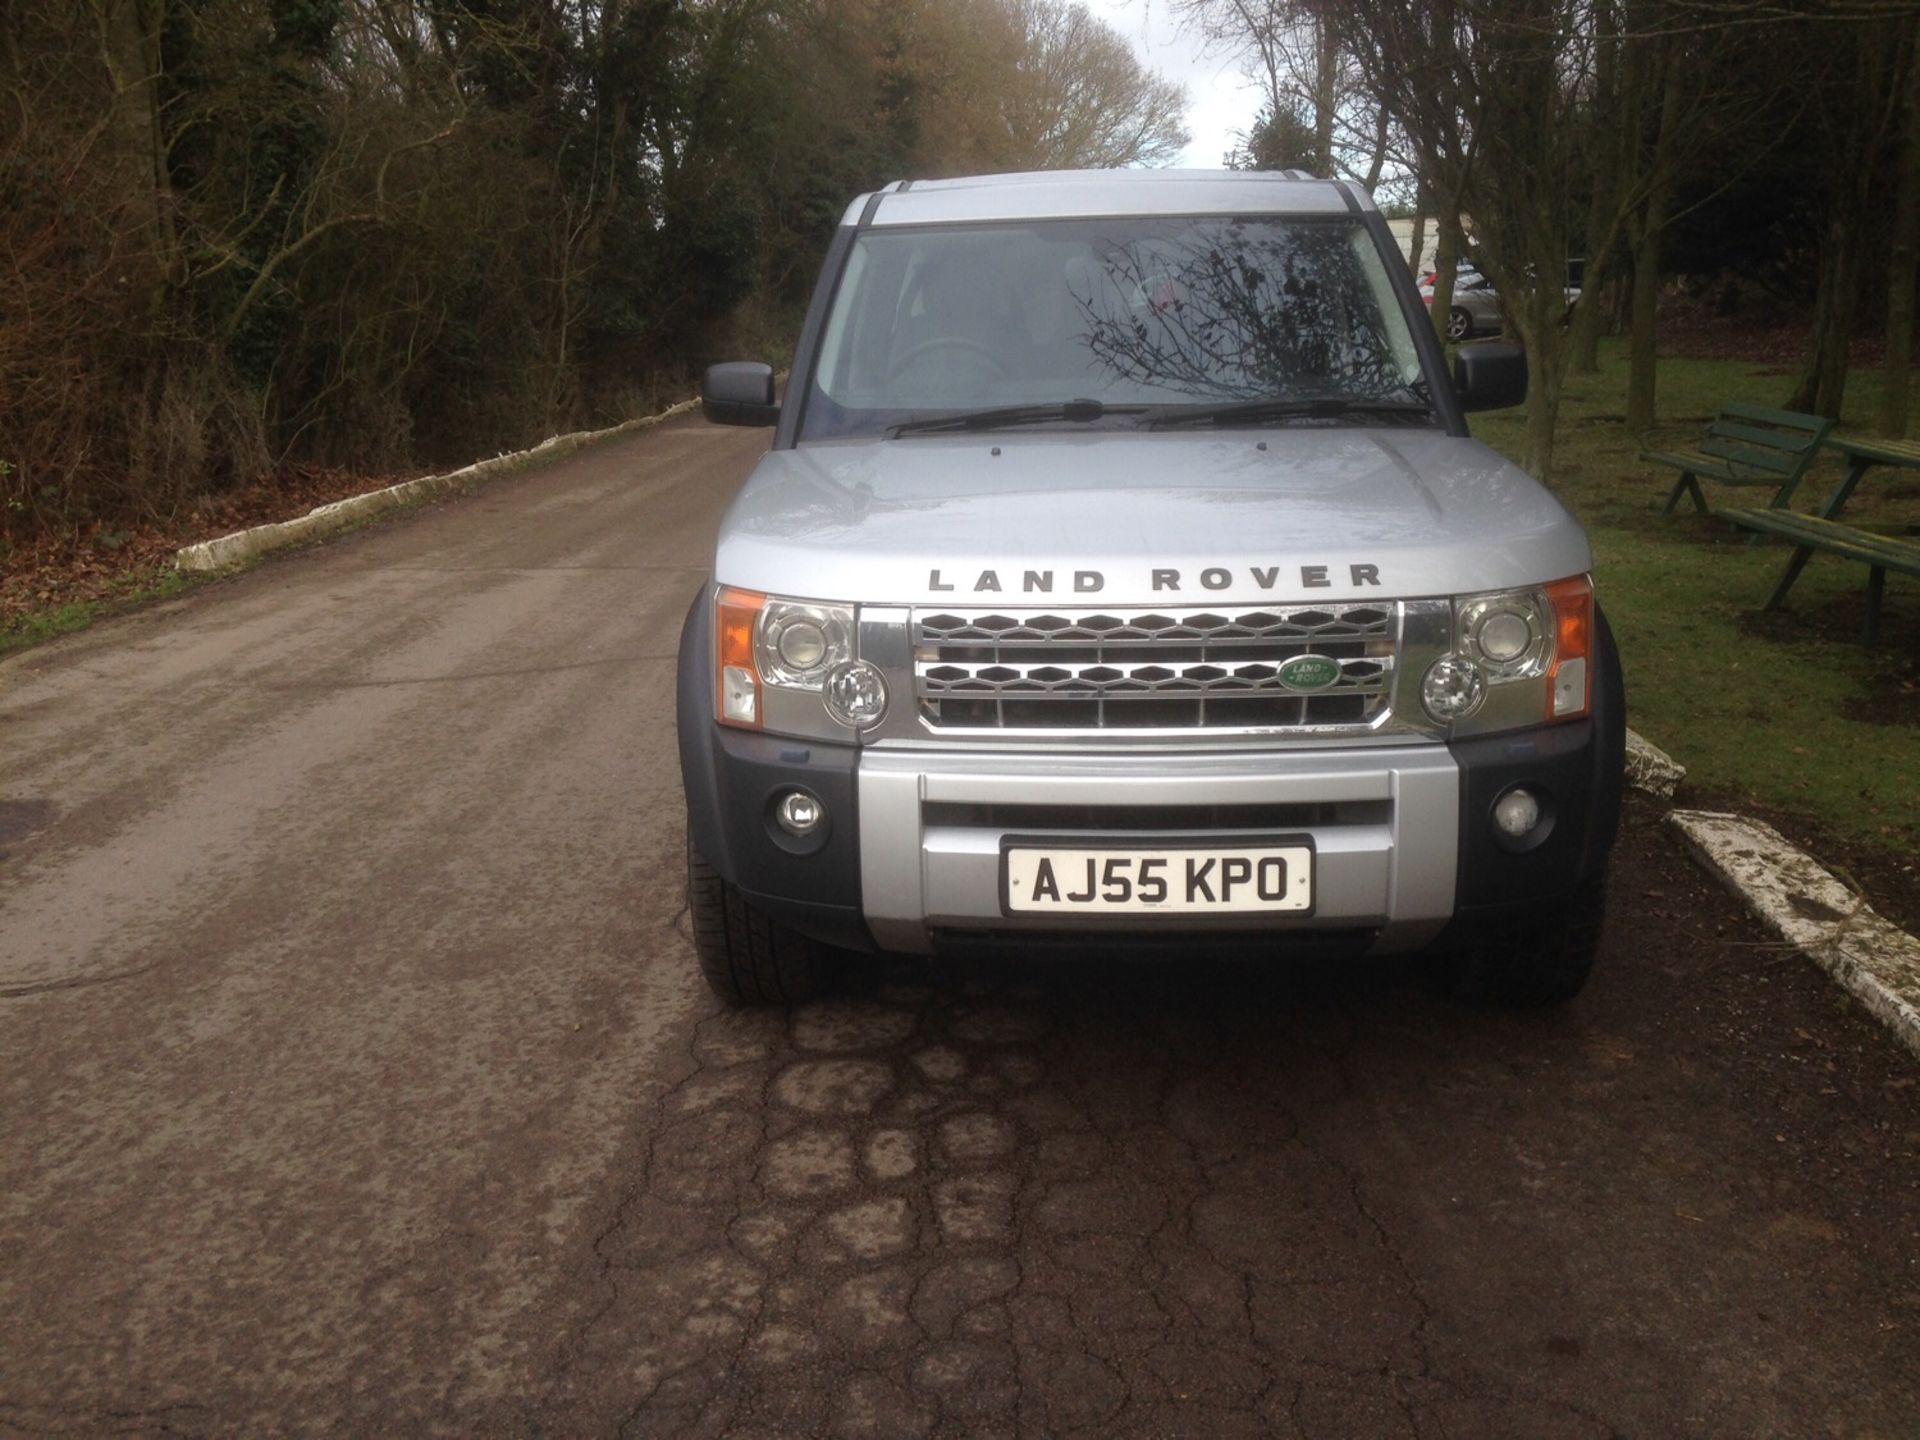 LAND ROVER DISCOVERY 2005 55 REG  V5 PRESENT APPROX 119k     COLLECTION FROM ESSEX - Image 2 of 8